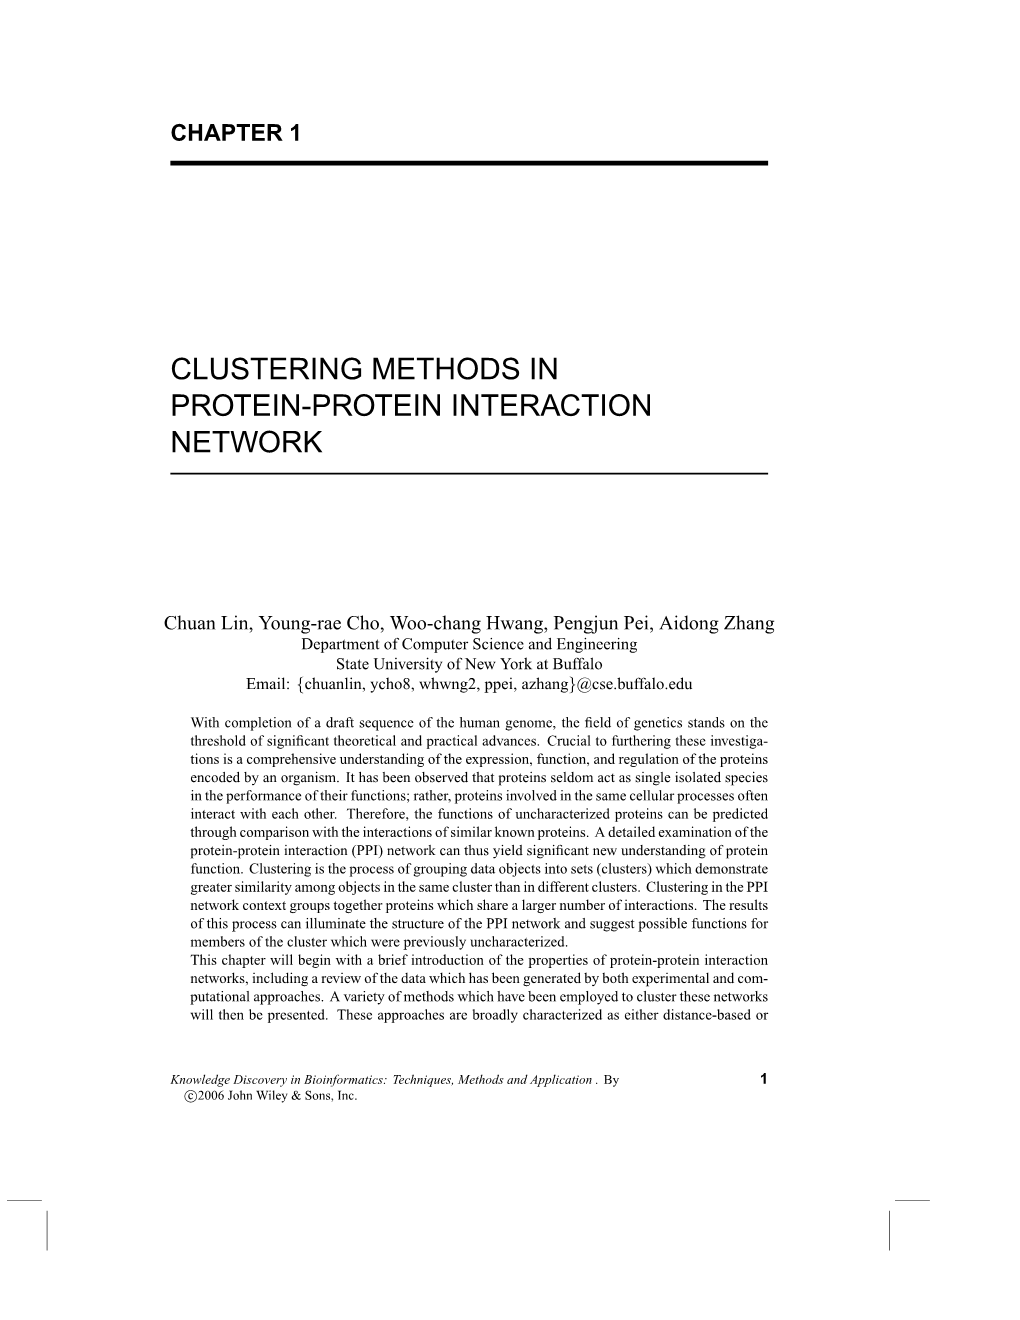 Clustering Methods in Protein-Protein Interaction Network